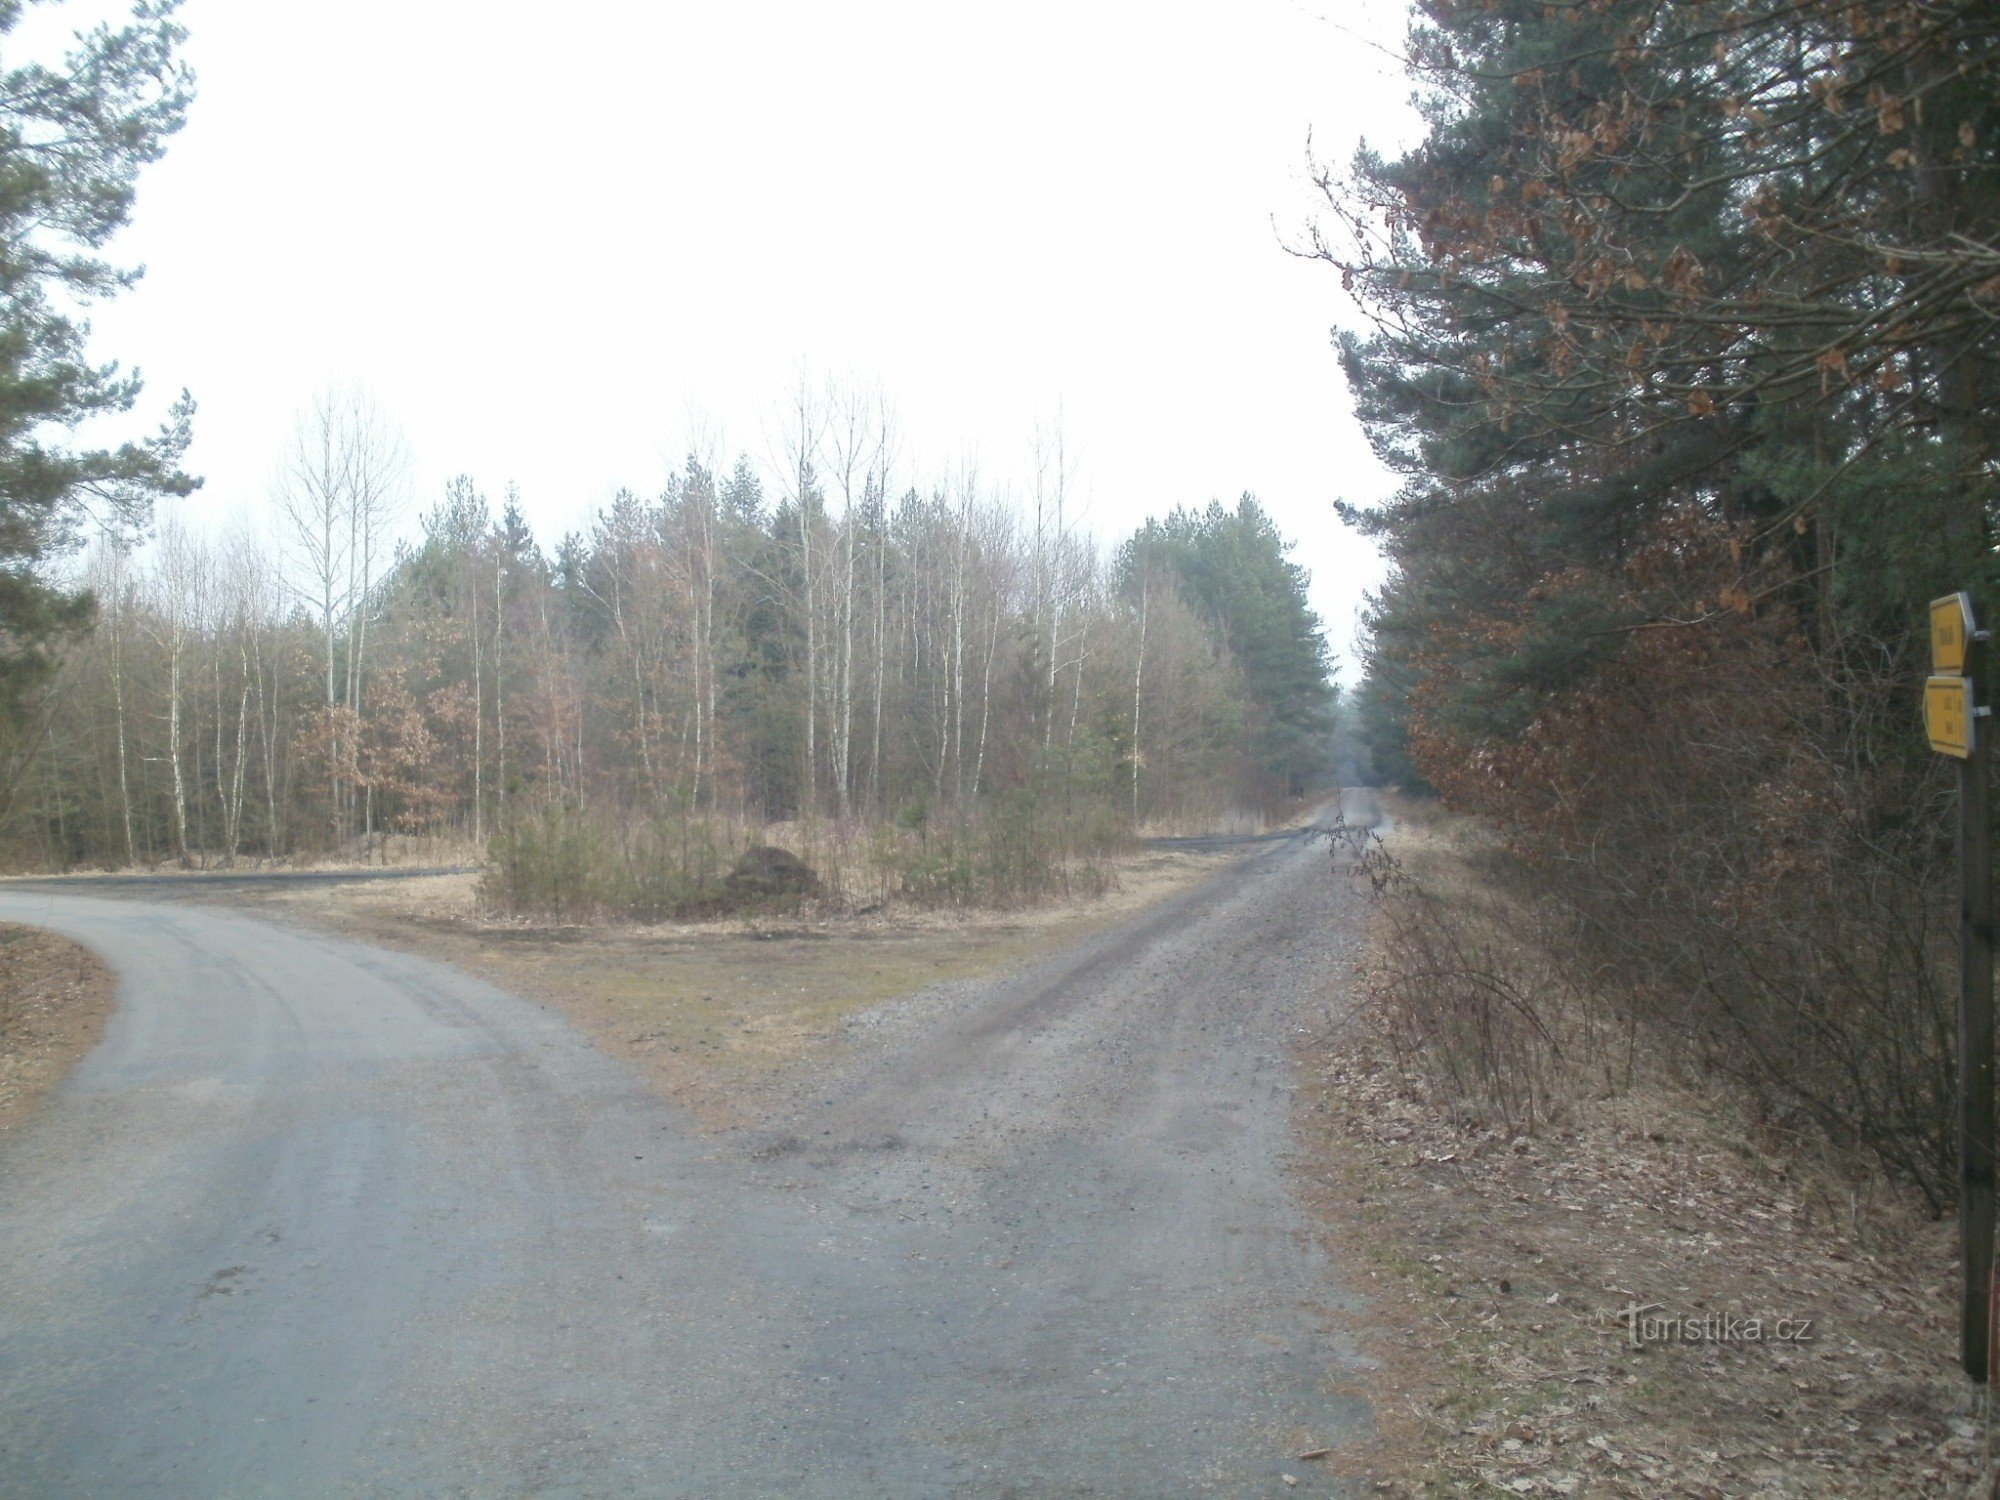 cycling crossroads in the Vysoké nad Labem forest